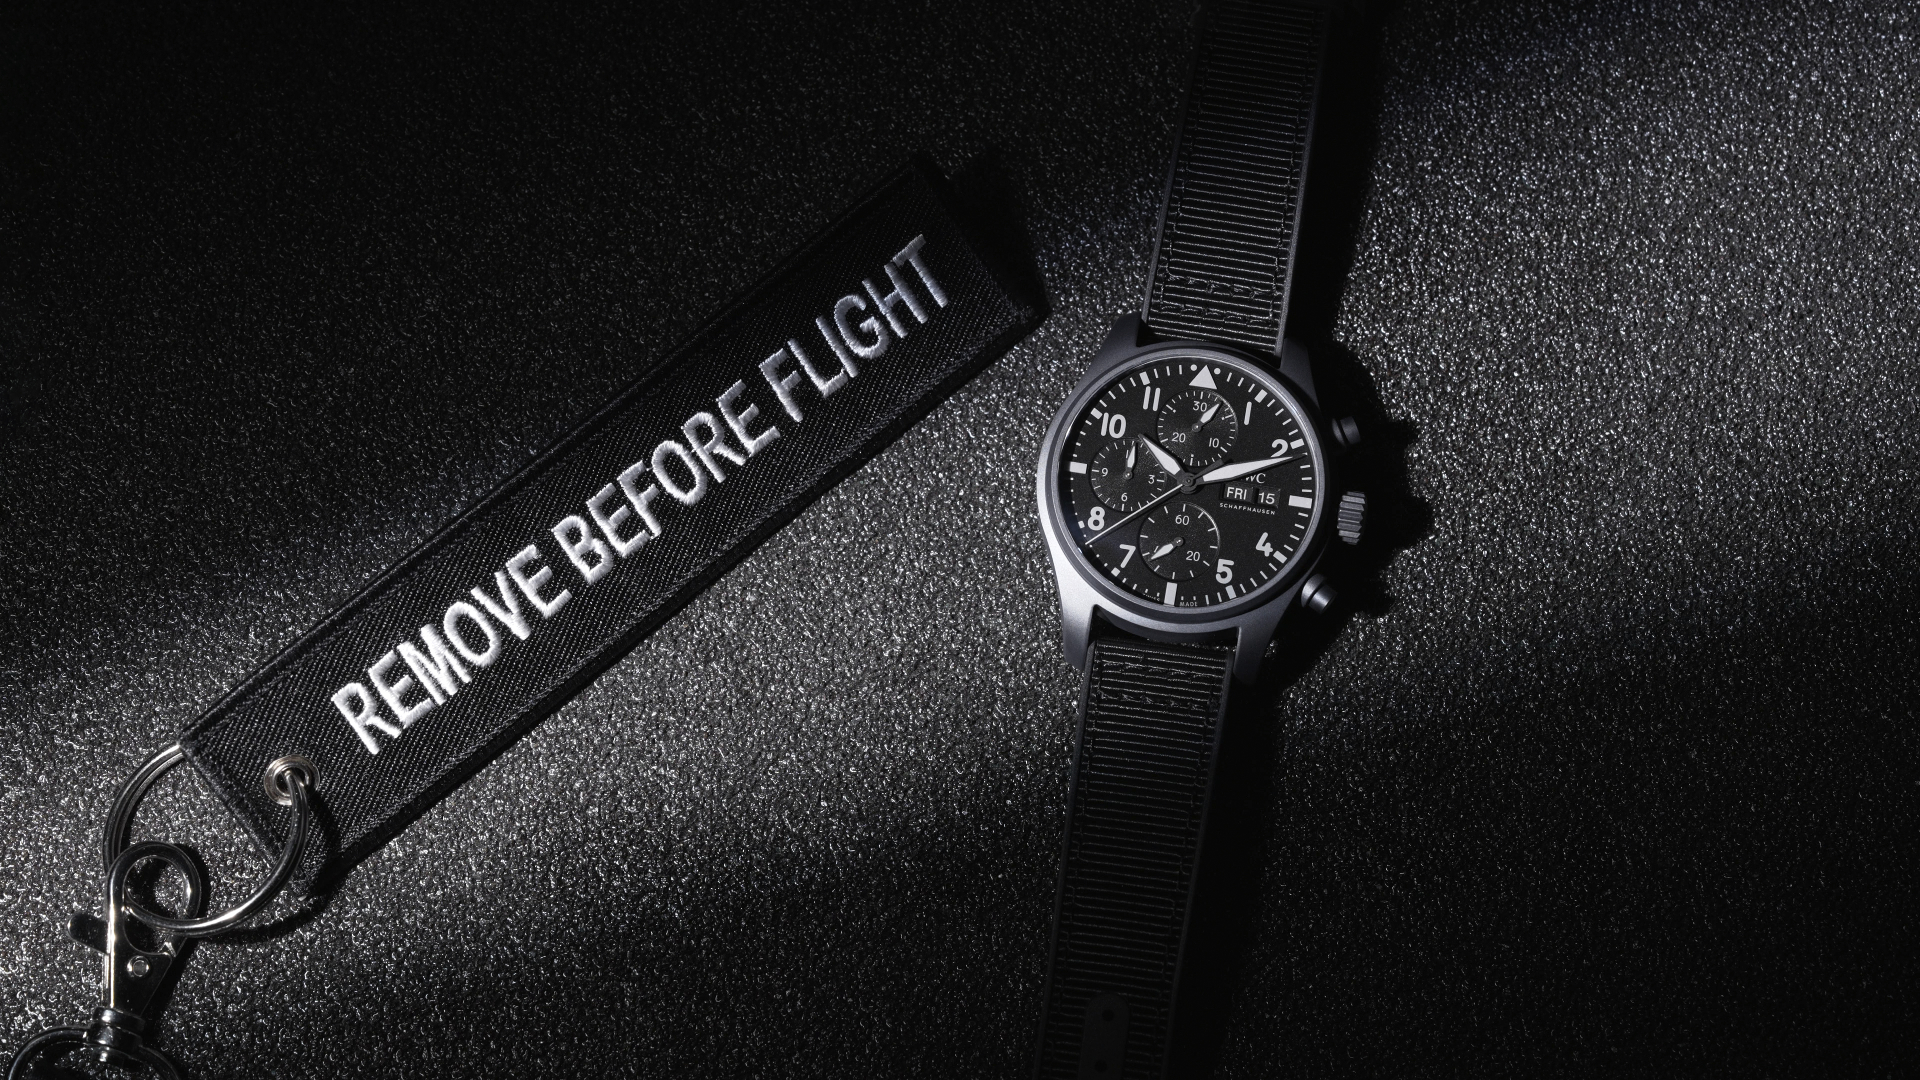 The Story of IWC, Top Gun, and the Ceratanium Pilot Watch